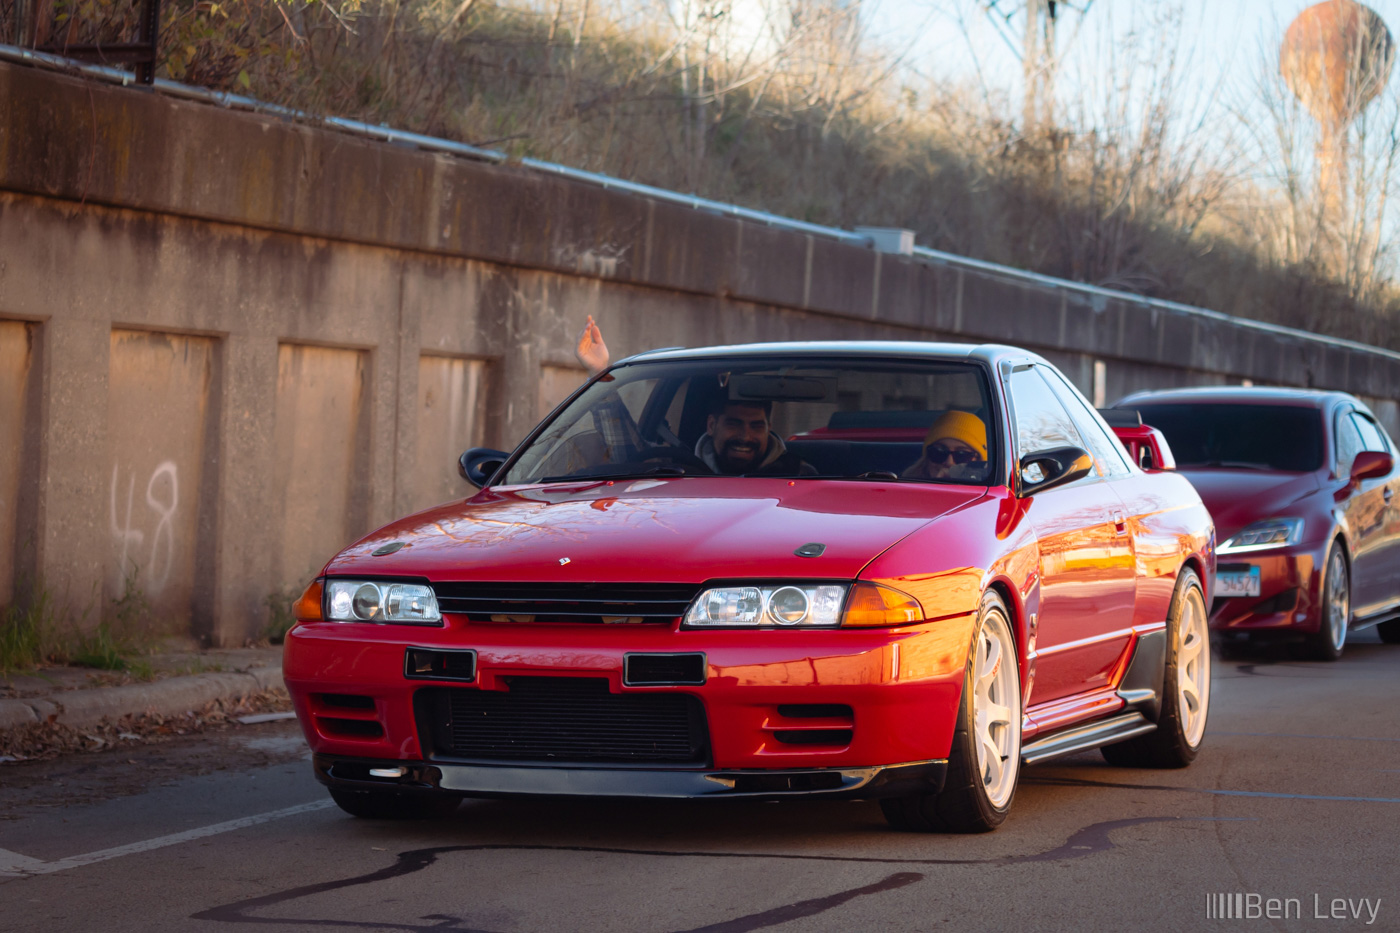 Red Nissan Skyline GT-R on Thanksgiving Day Drive